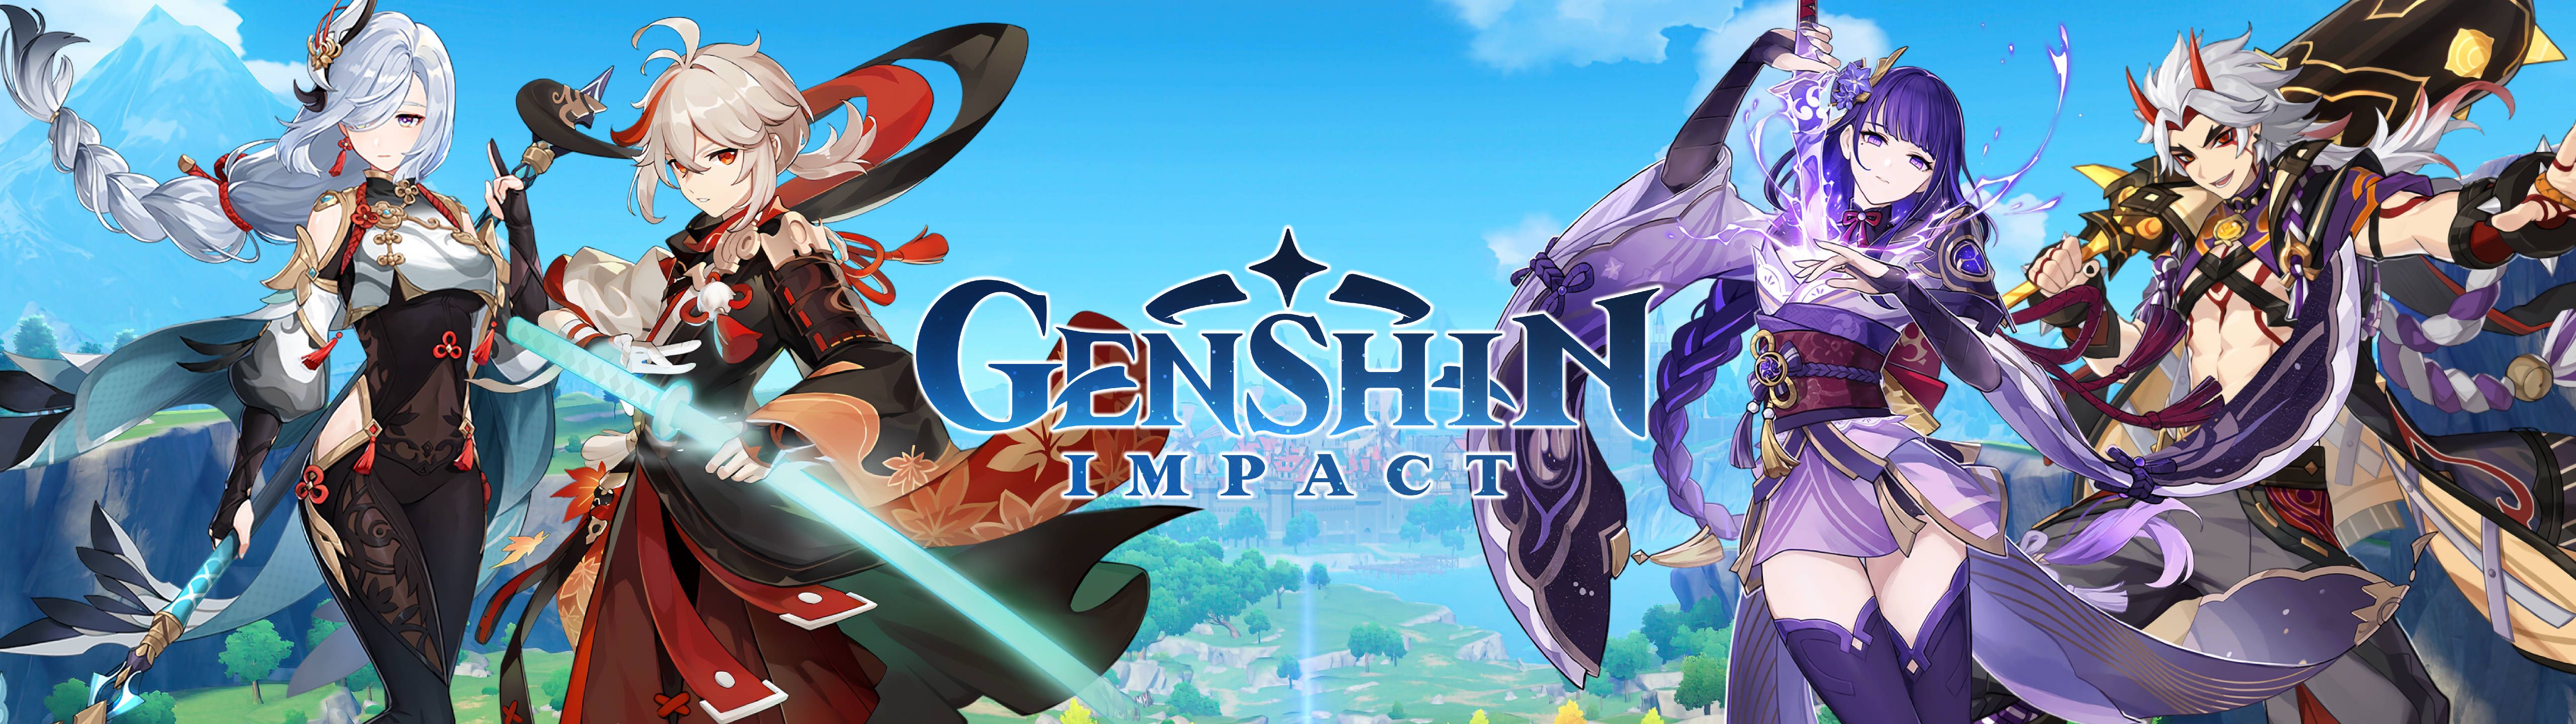 Genshin Impact is a free-to-play, open-world action role-playing game developed by miHoYo. - 5120x1440